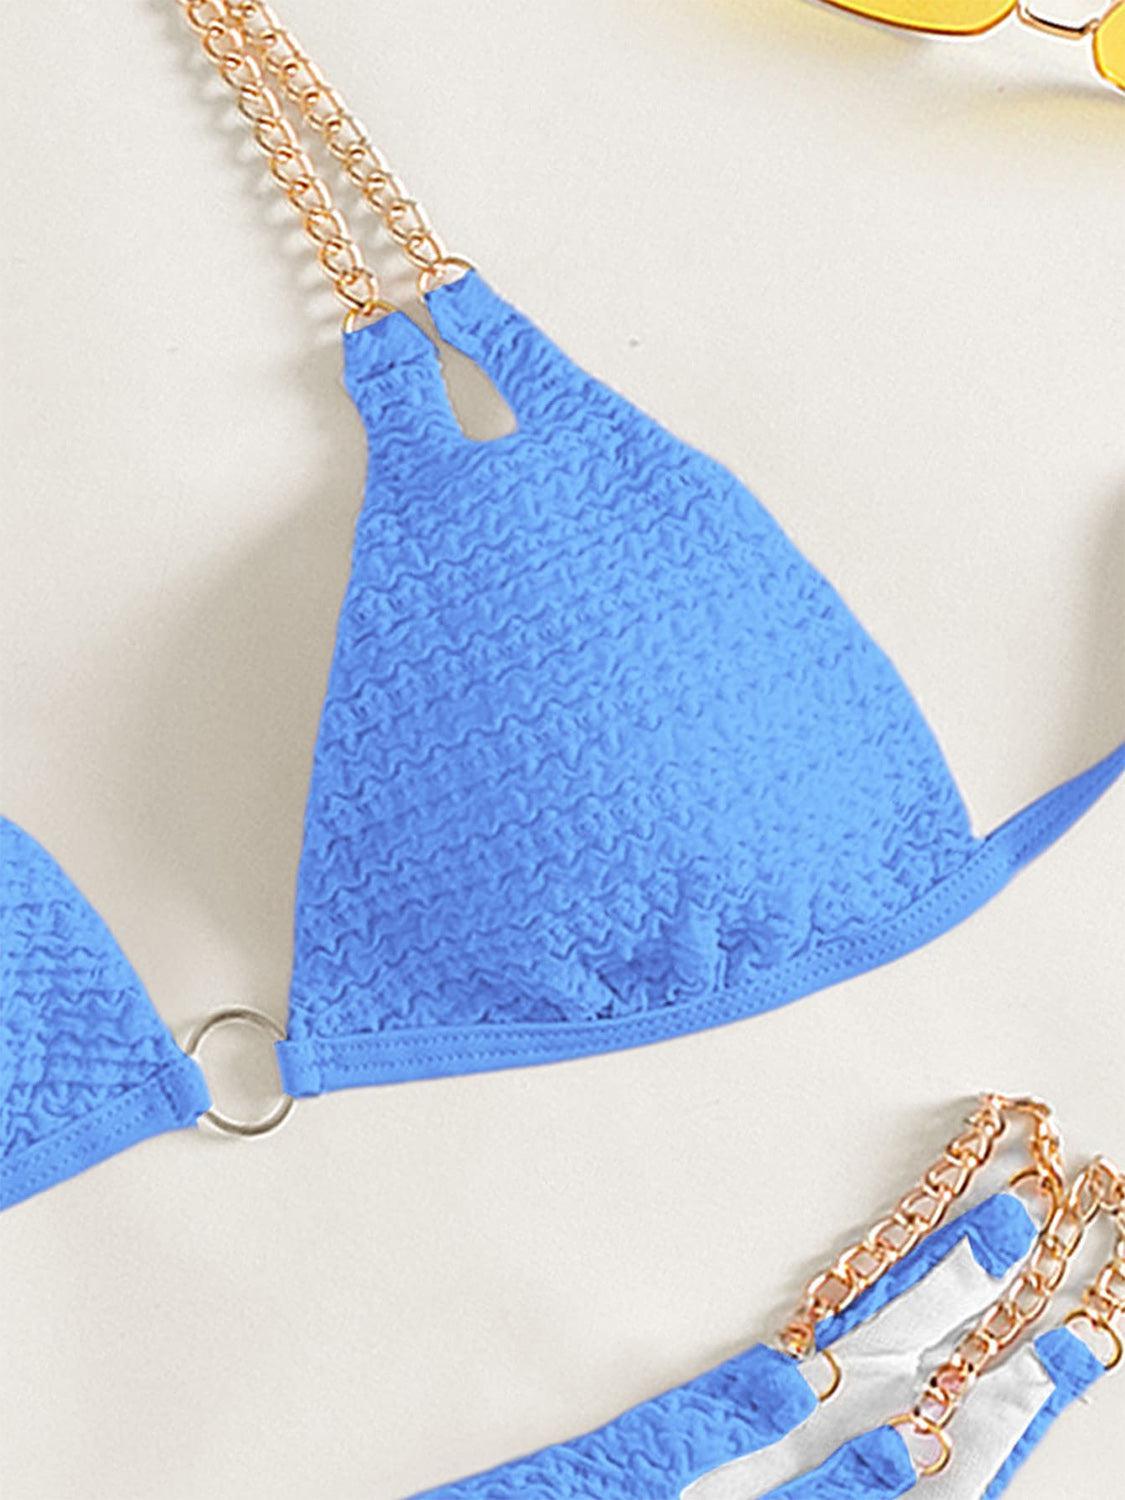 a pair of blue bikinisuits with chains on them